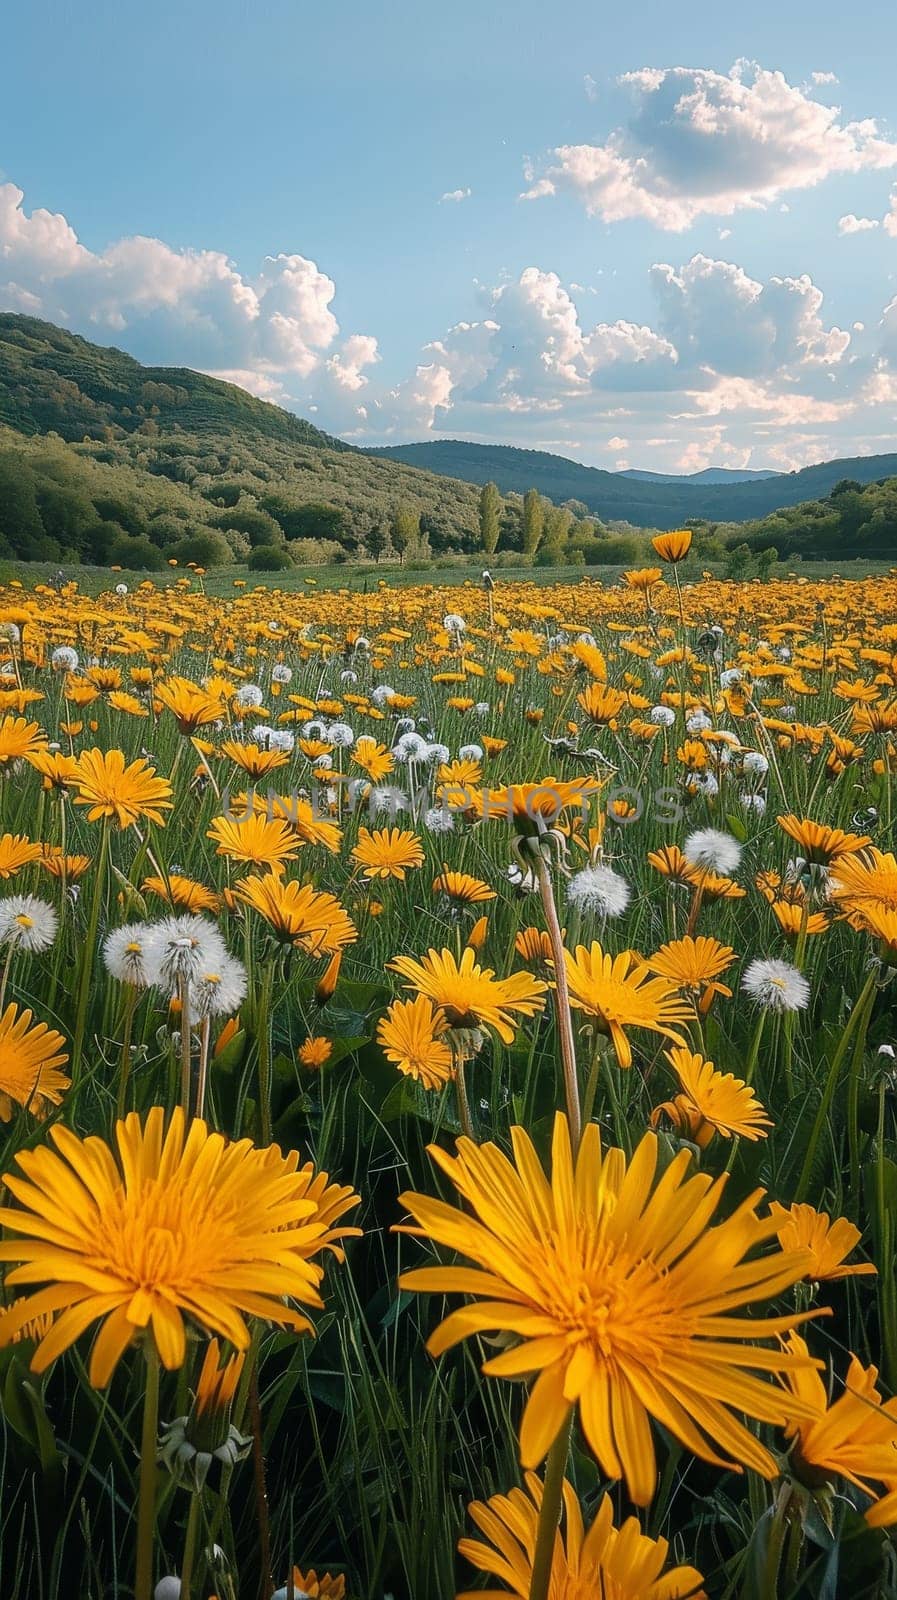 A field of yellow and white flowers with a blue sky in the background.